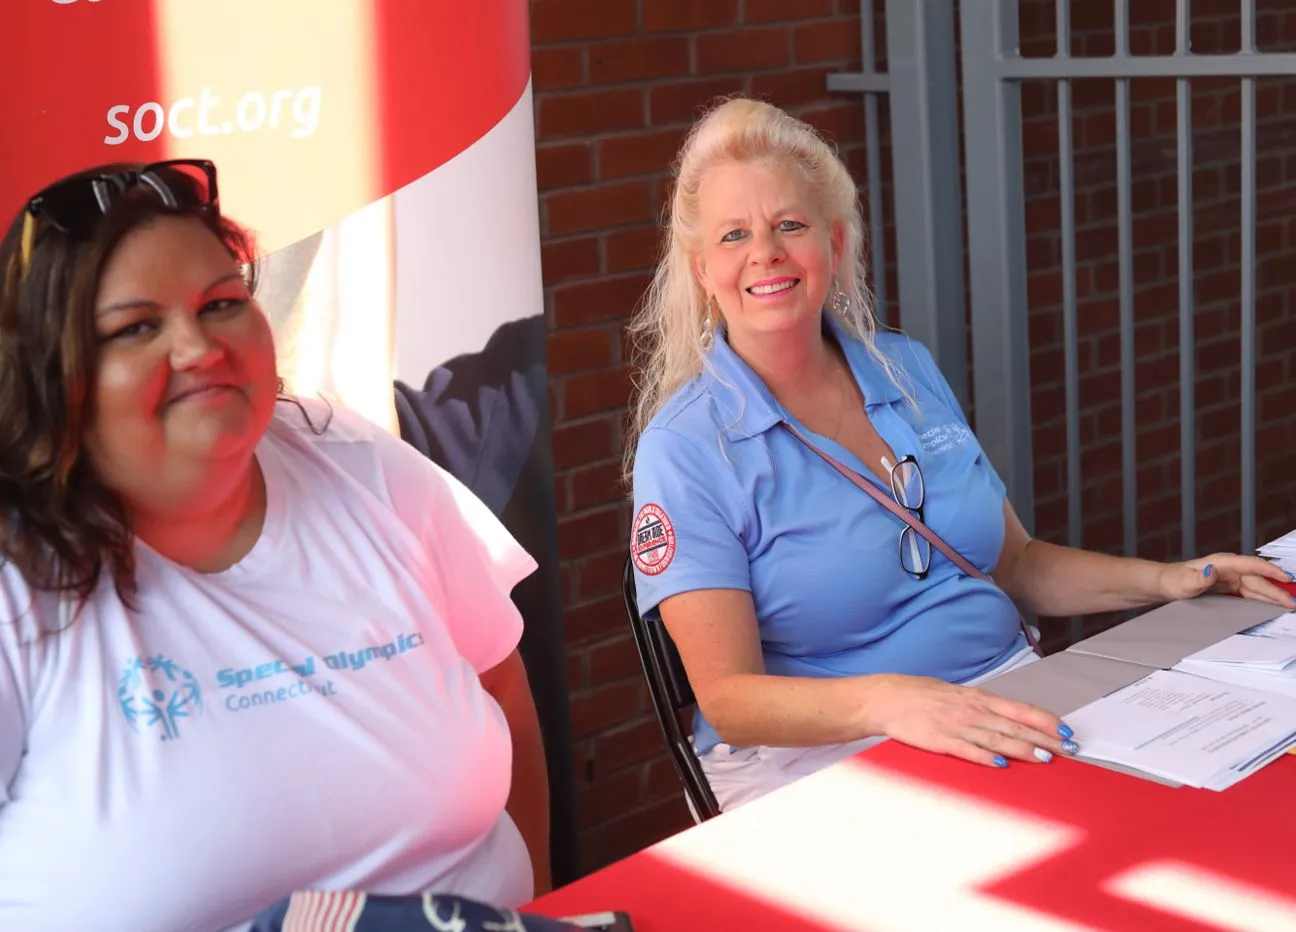 Two women sitting at a table outdoors, wearing Special Olympics shirts.